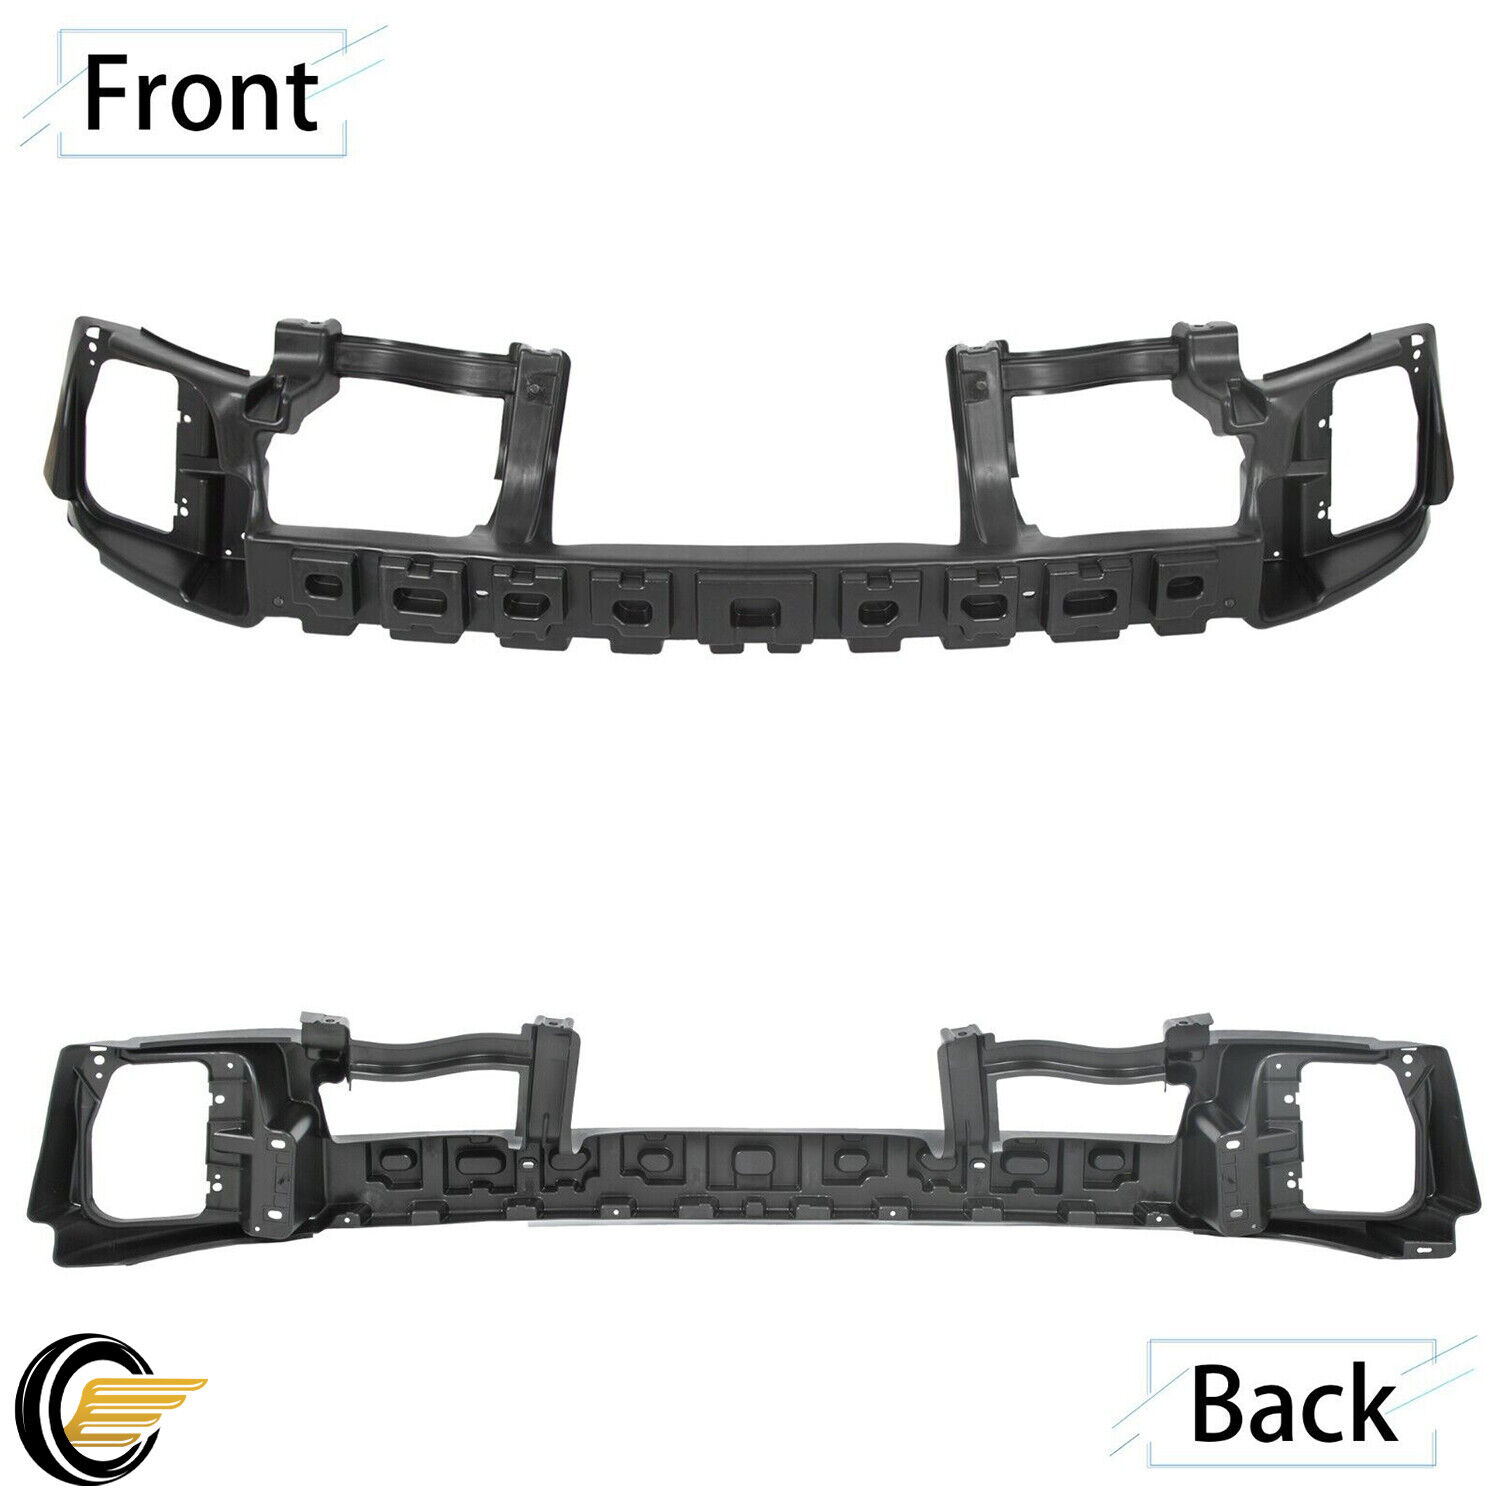 Front Bumper Energy Absorber For 2013-2020 Dodge Ram 1500 All Cab Types